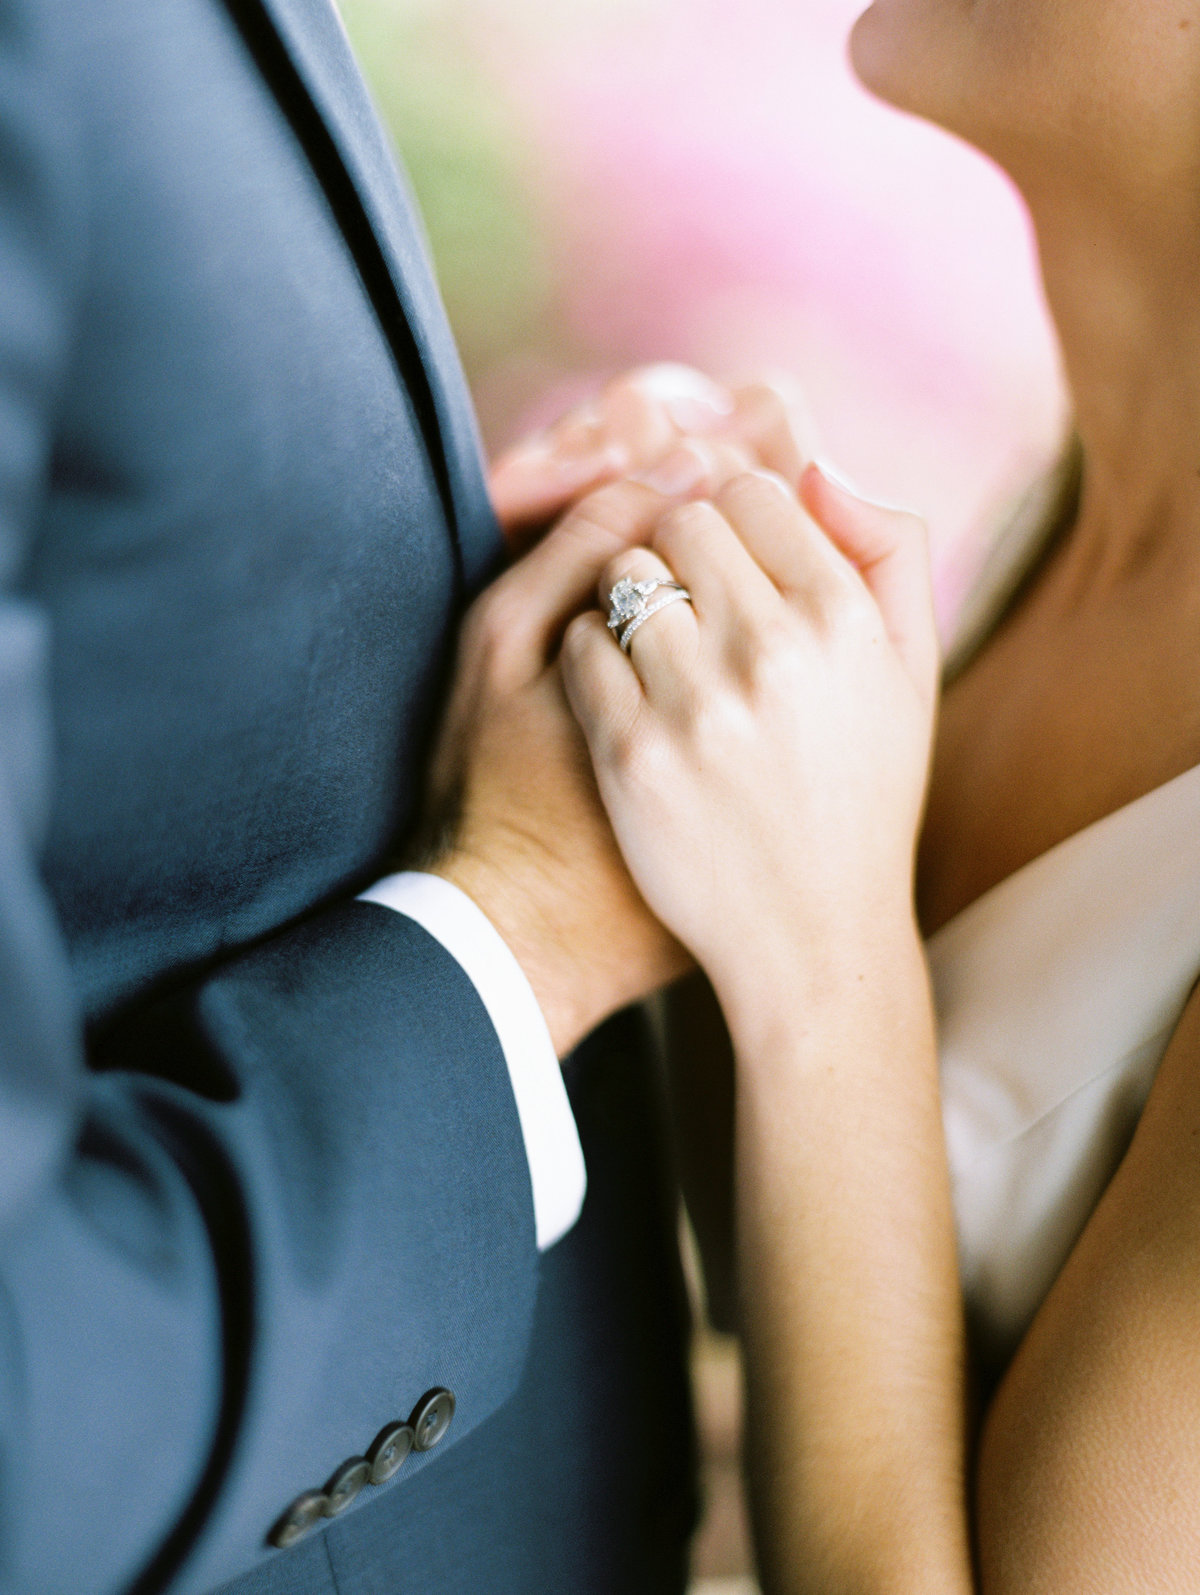 Bride and groom holding hands with wedding ring showing.